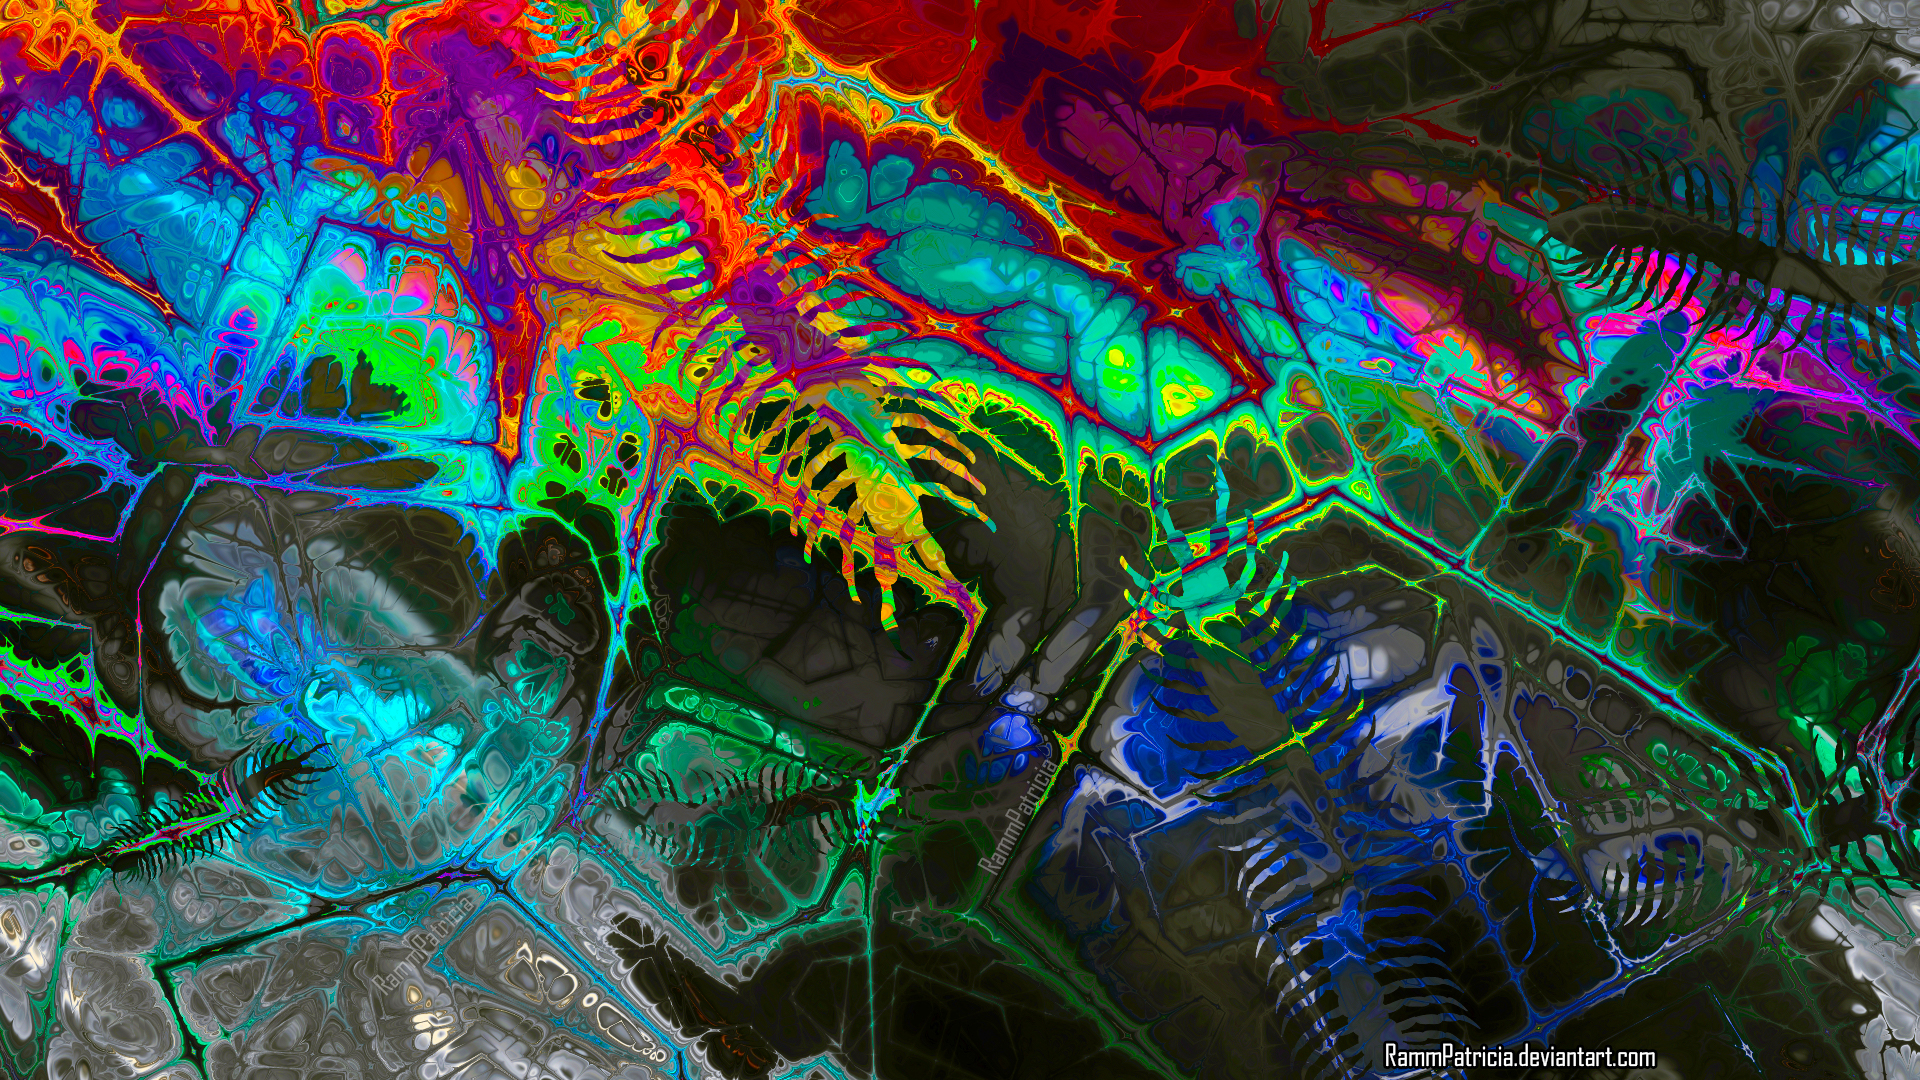 General 1920x1080 RammPatricia digital art abstract colorful centipede iridescent watermarked trippy psychedelic